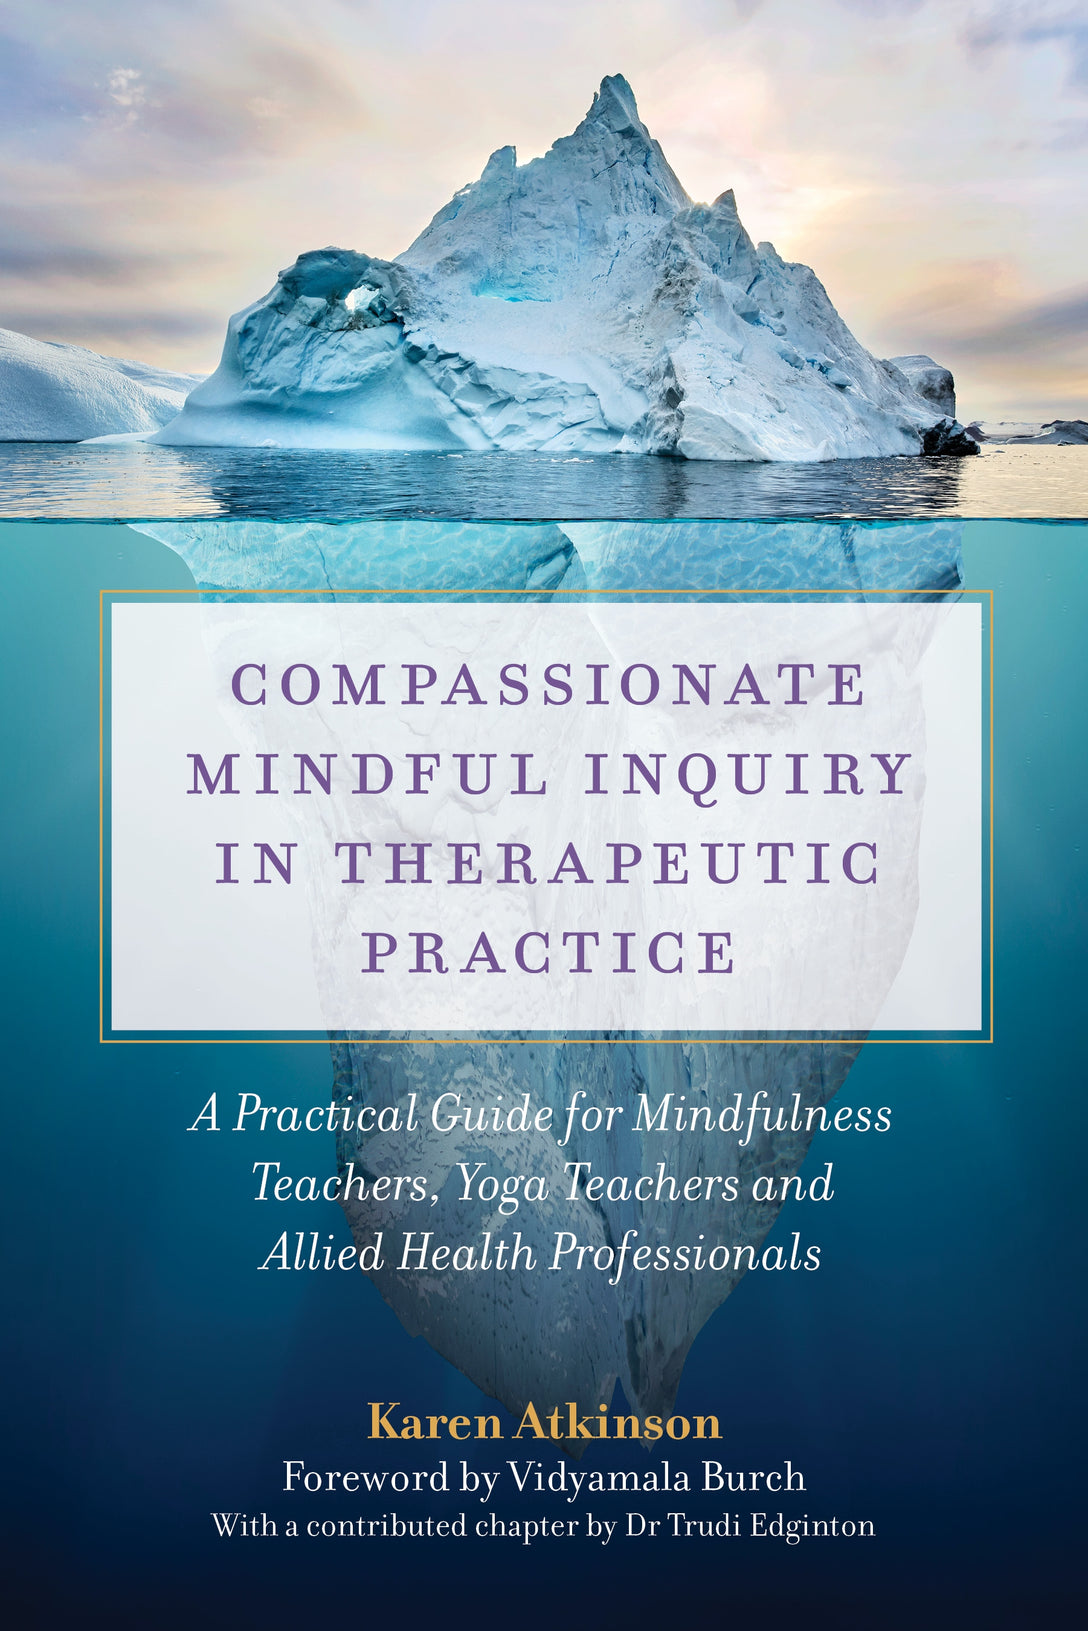 Compassionate Mindful Inquiry in Therapeutic Practice by Karen Atkinson, Vidyamala Burch